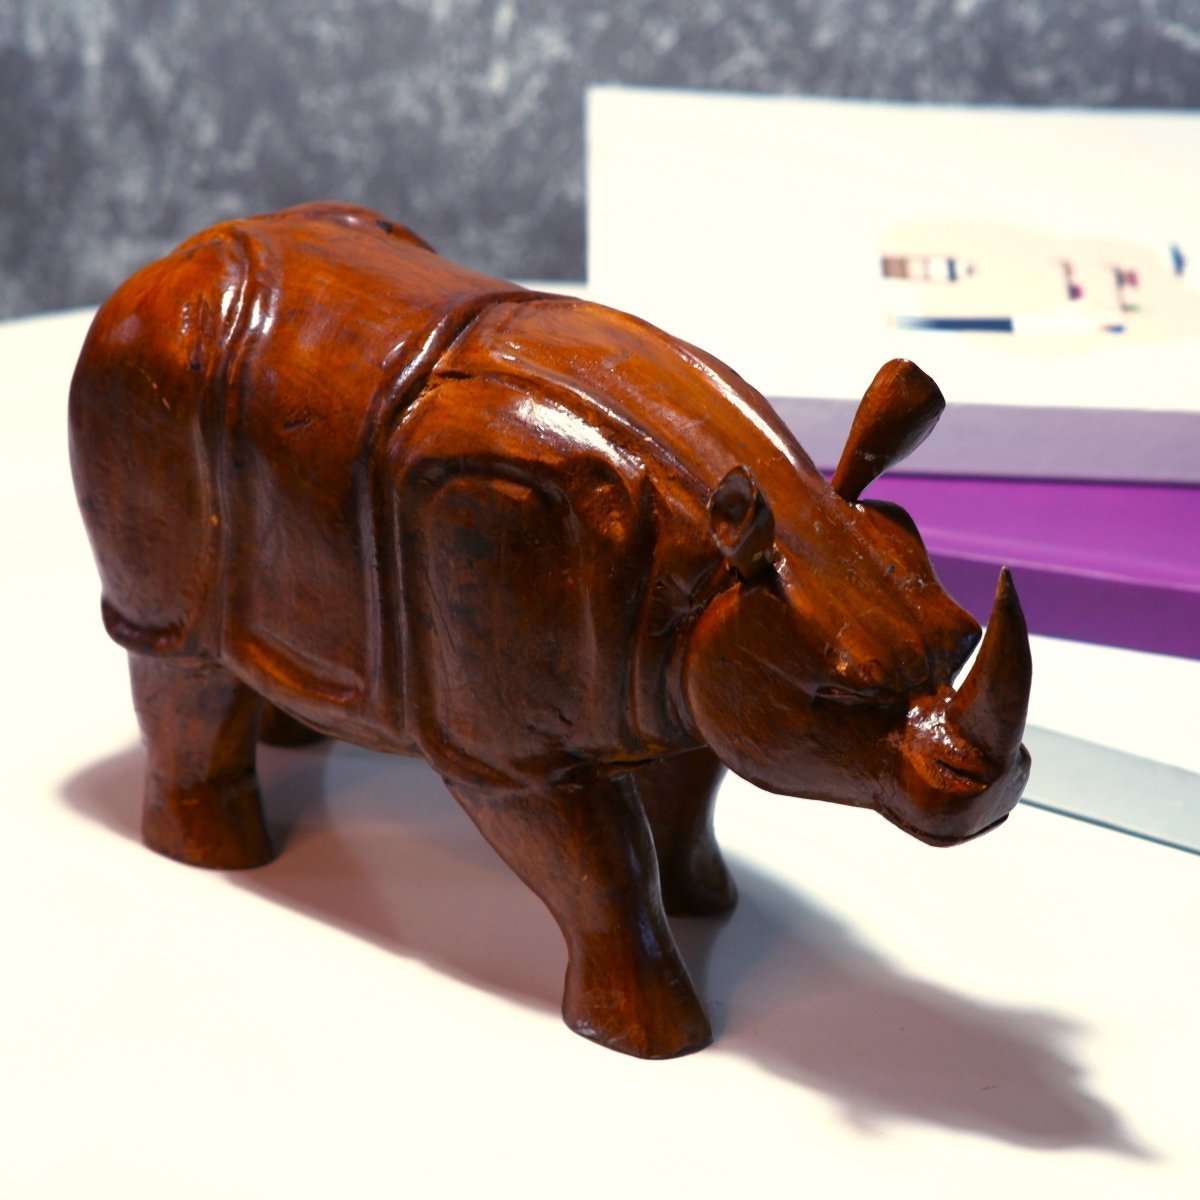 Artistic Wooden Carved Rhino Sculpture -Wooden-Sowpeace-Artistic Wooden Carved Rhino Sculpture -Wooden-Sowpeace-Artistic Wooden Carved Rhino Sculpture-Wood-WRHN-WDN-TT-Sowpeace-Wood-WRHN-WDN-TT-Sowpeace